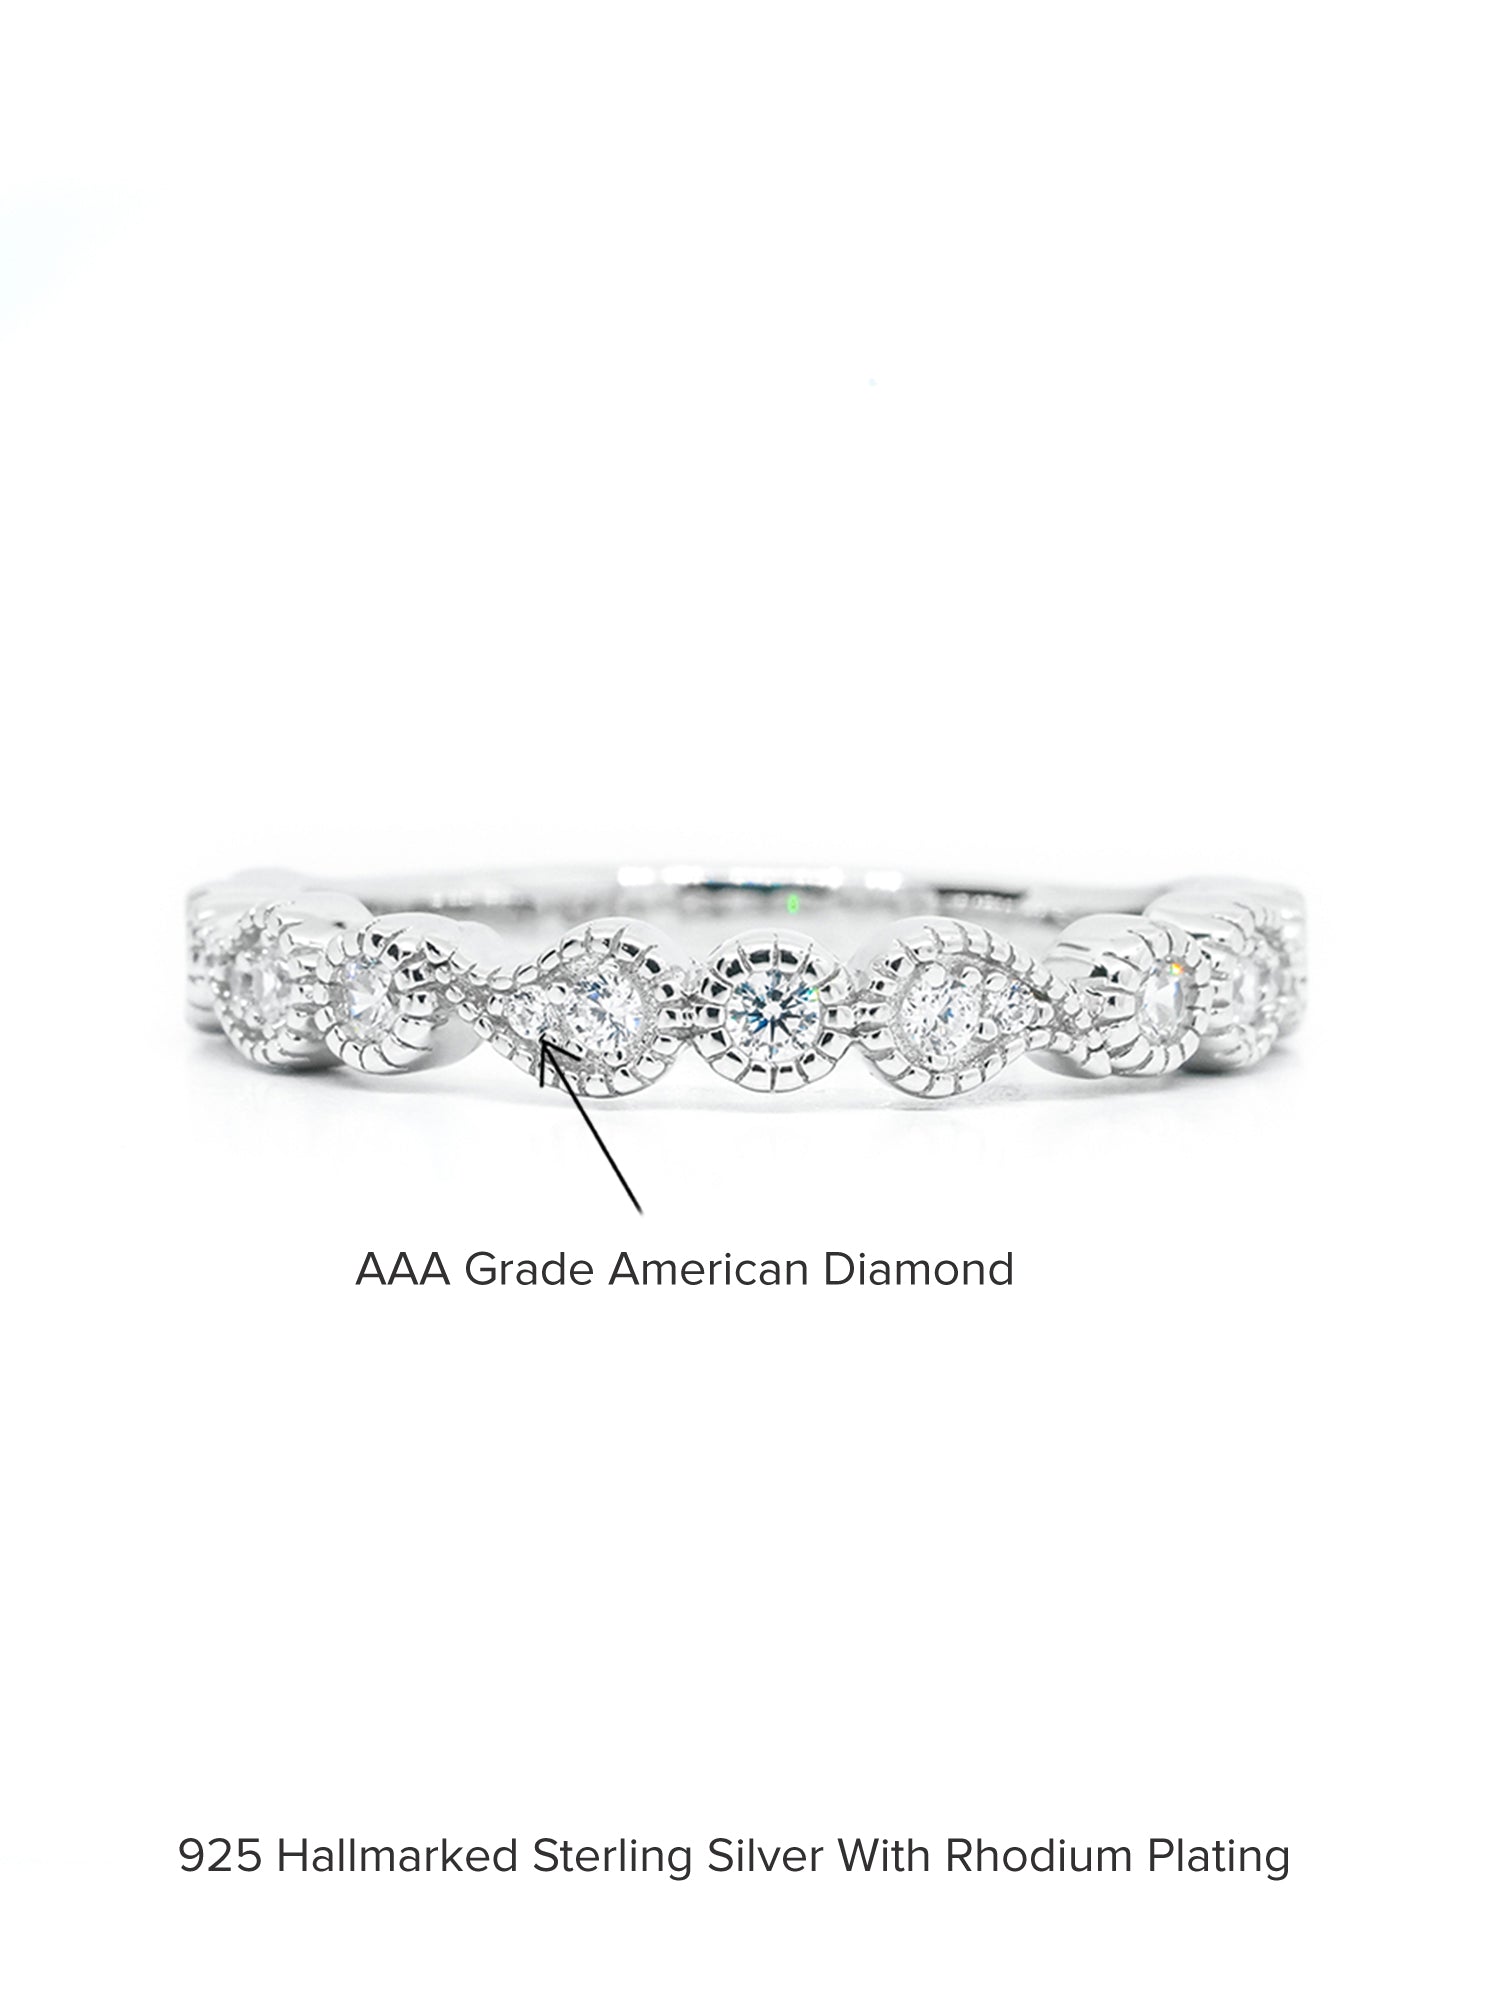 SIMPLE AMERICAN DIAMOND BAND SILVER RING-5